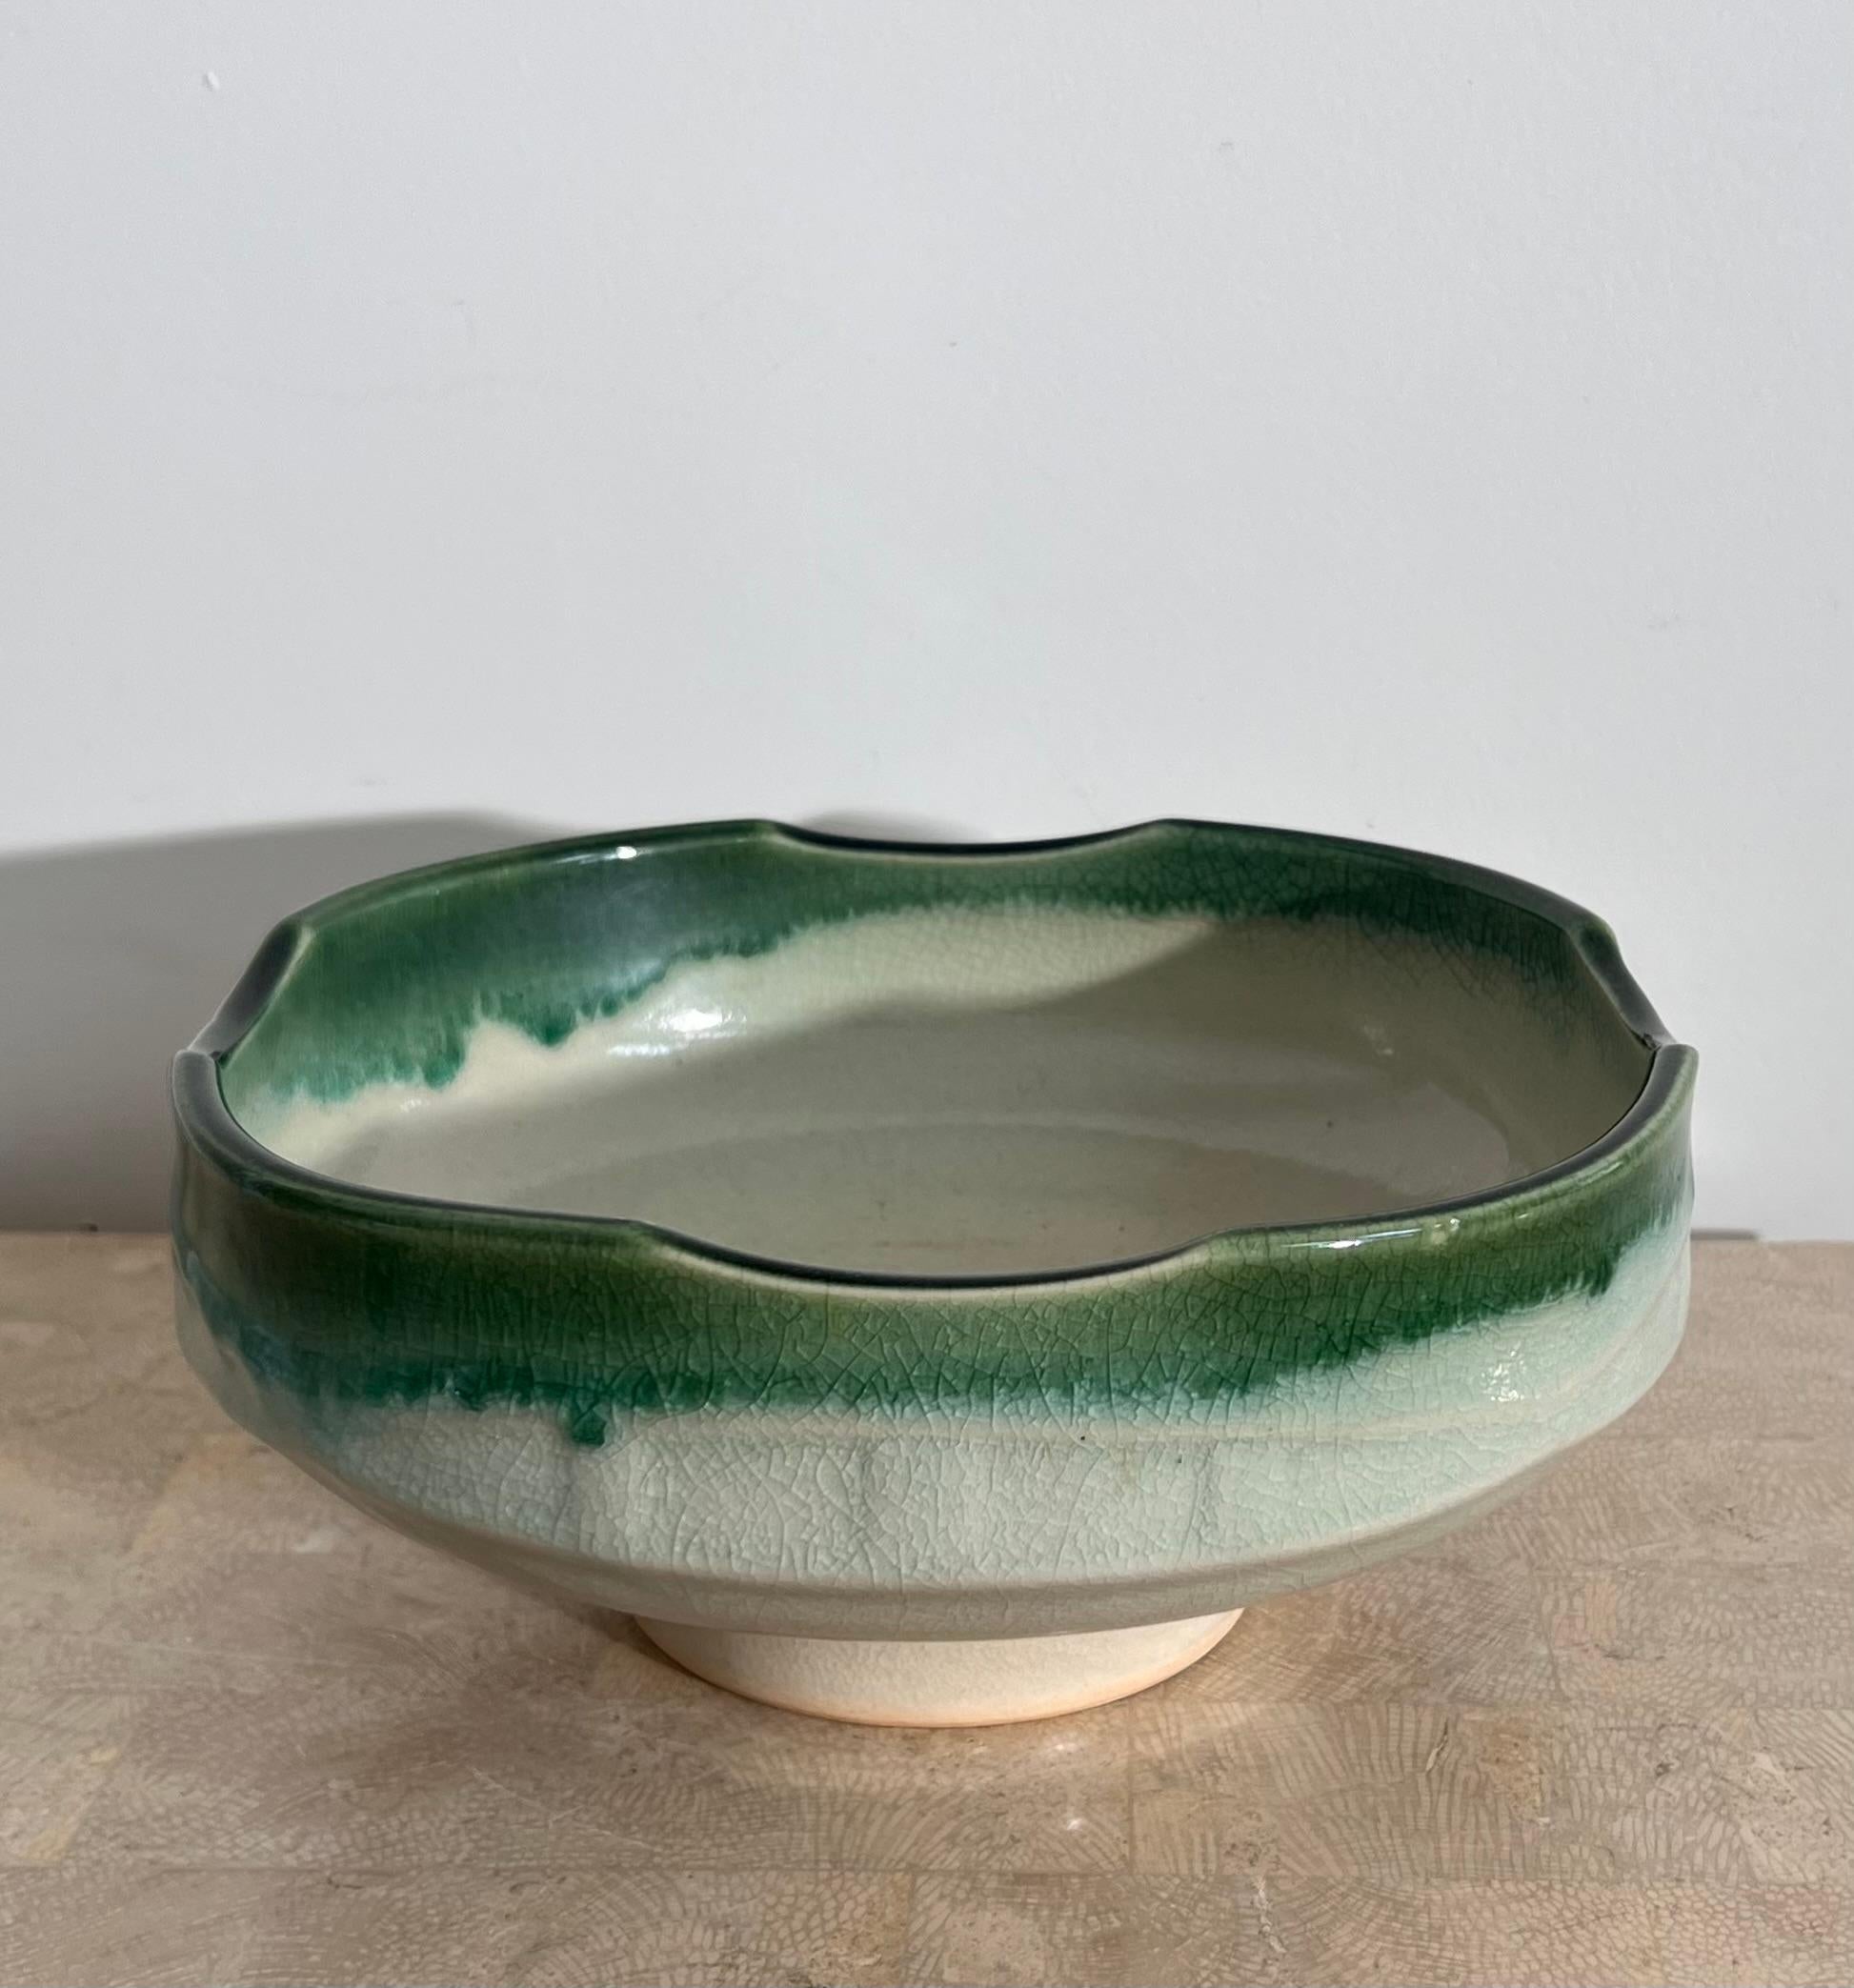 A large crackle ceramic fruit or serving bowl, made in Japan circa late 1960s. Tones of seafoam and grass green. A slightly rounded square shape. Wonderful condition. Pick up in LA or worldwide shipping available.
Dimensions: 9.5” W x 9.5” D x 4.5”